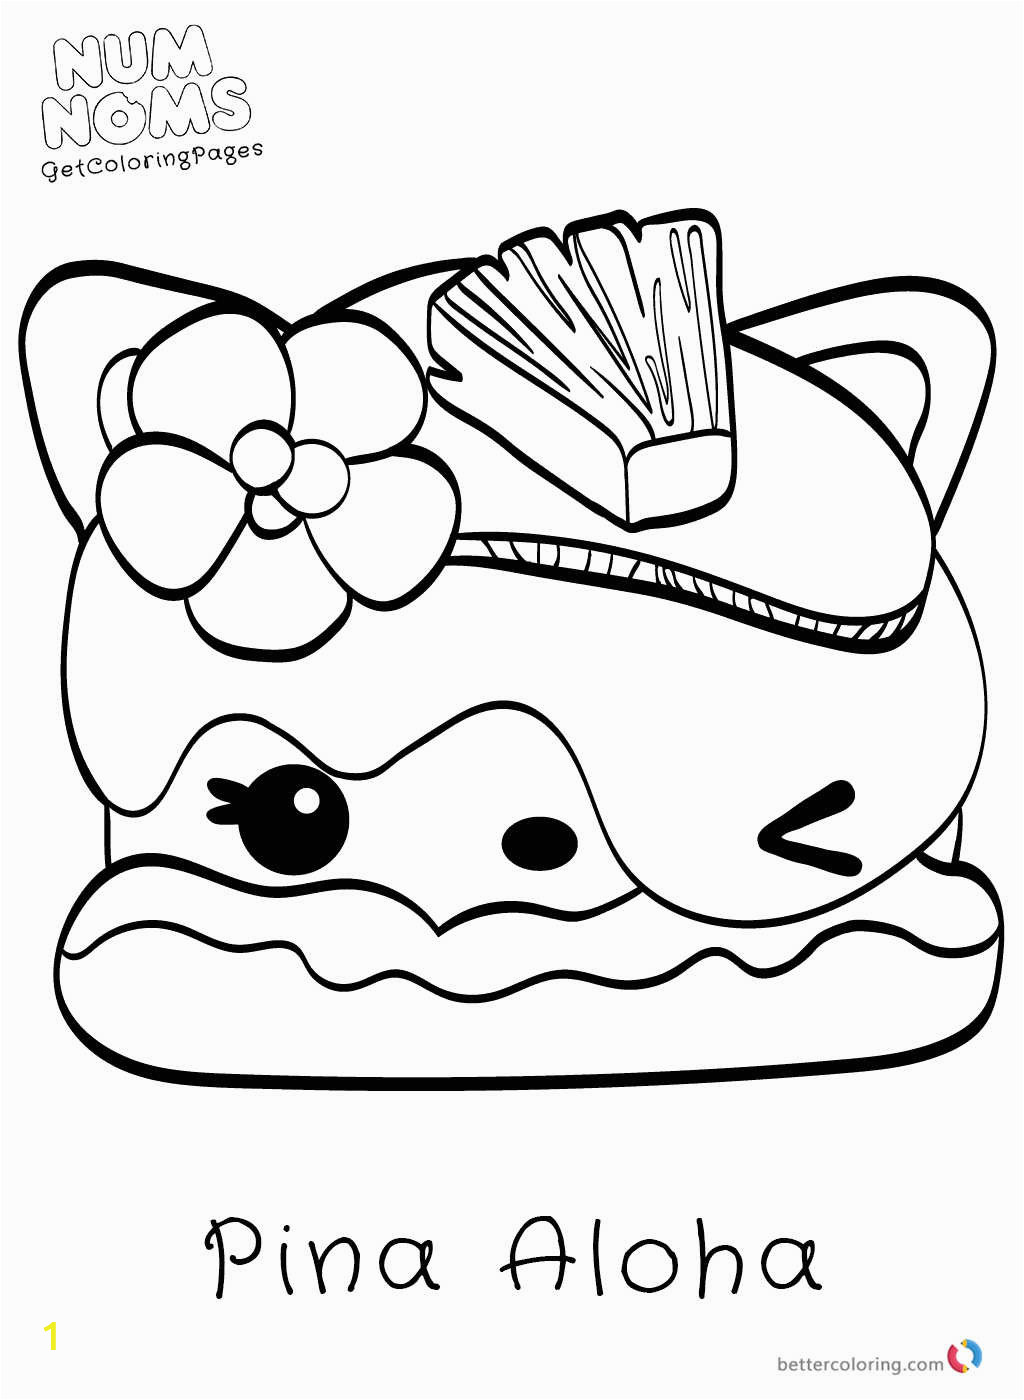 Num Nom Coloring Pages Black and White Num Noms Coloring Free Printable Coloring Pages